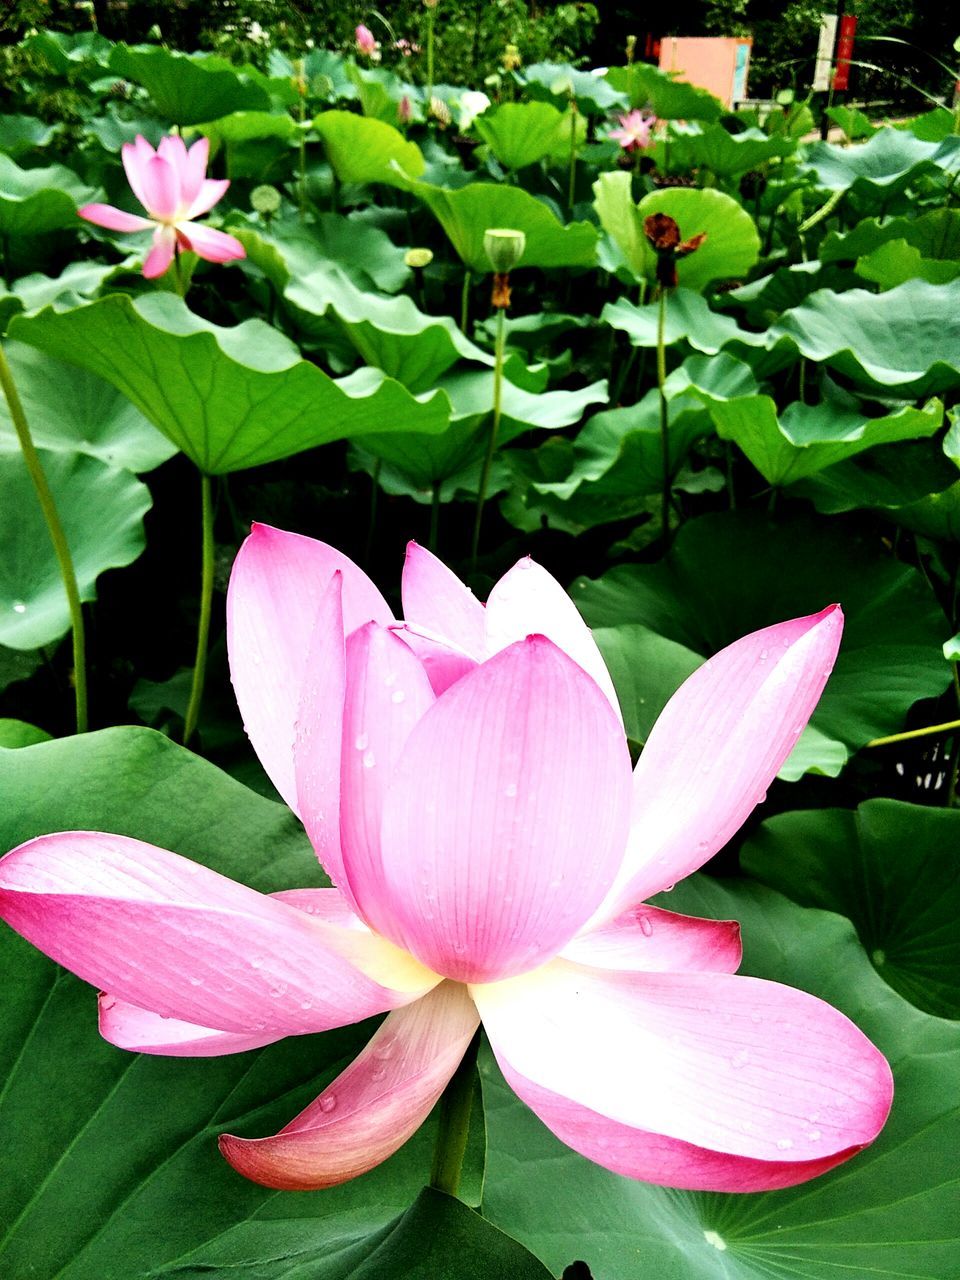 flower, petal, beauty in nature, fragility, freshness, growth, nature, leaf, pink color, flower head, blooming, plant, green color, day, no people, lotus, lotus water lily, close-up, outdoors, periwinkle